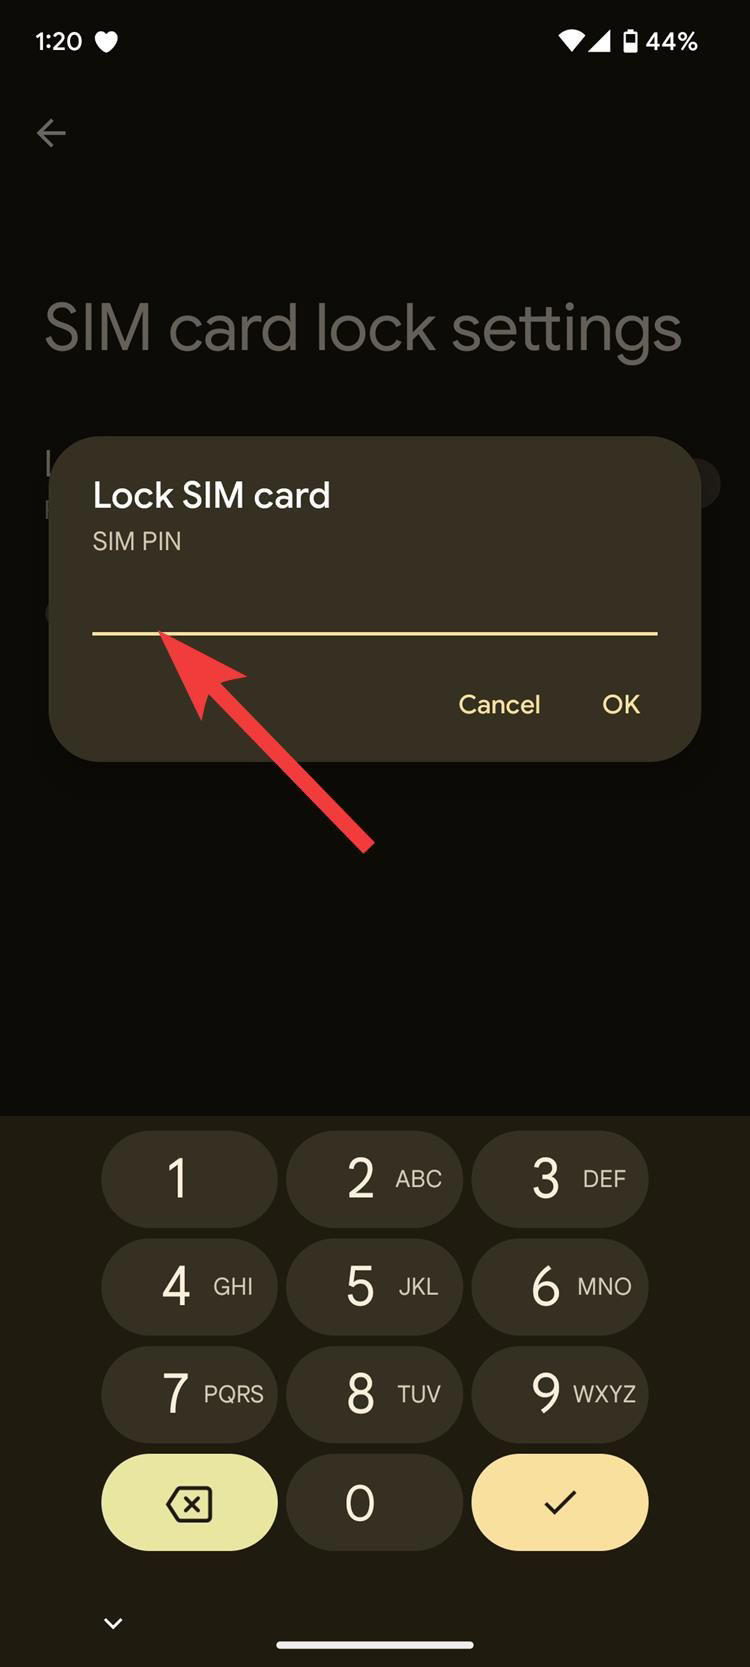 The Lock SIM card dialog box prompting you to enter your current SIM PIN on a Pixel phone with a red arrow pointing to the entry line